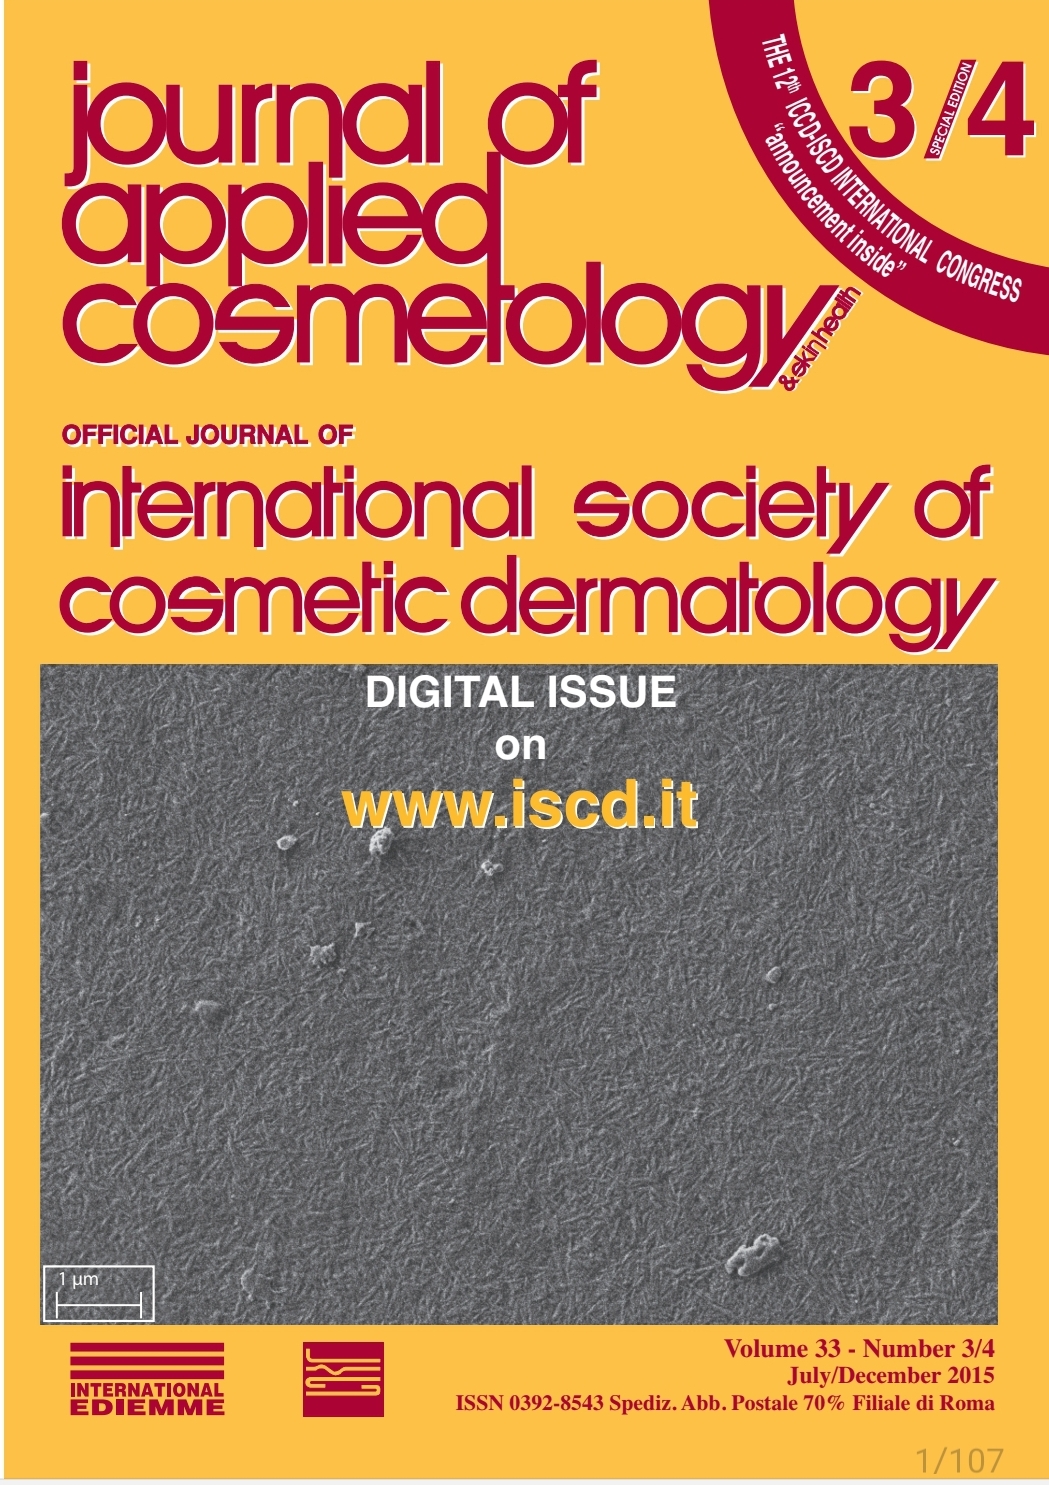 					View Vol. 33 No. 3/4 (2015): Journal of Applied Cosmetology
				